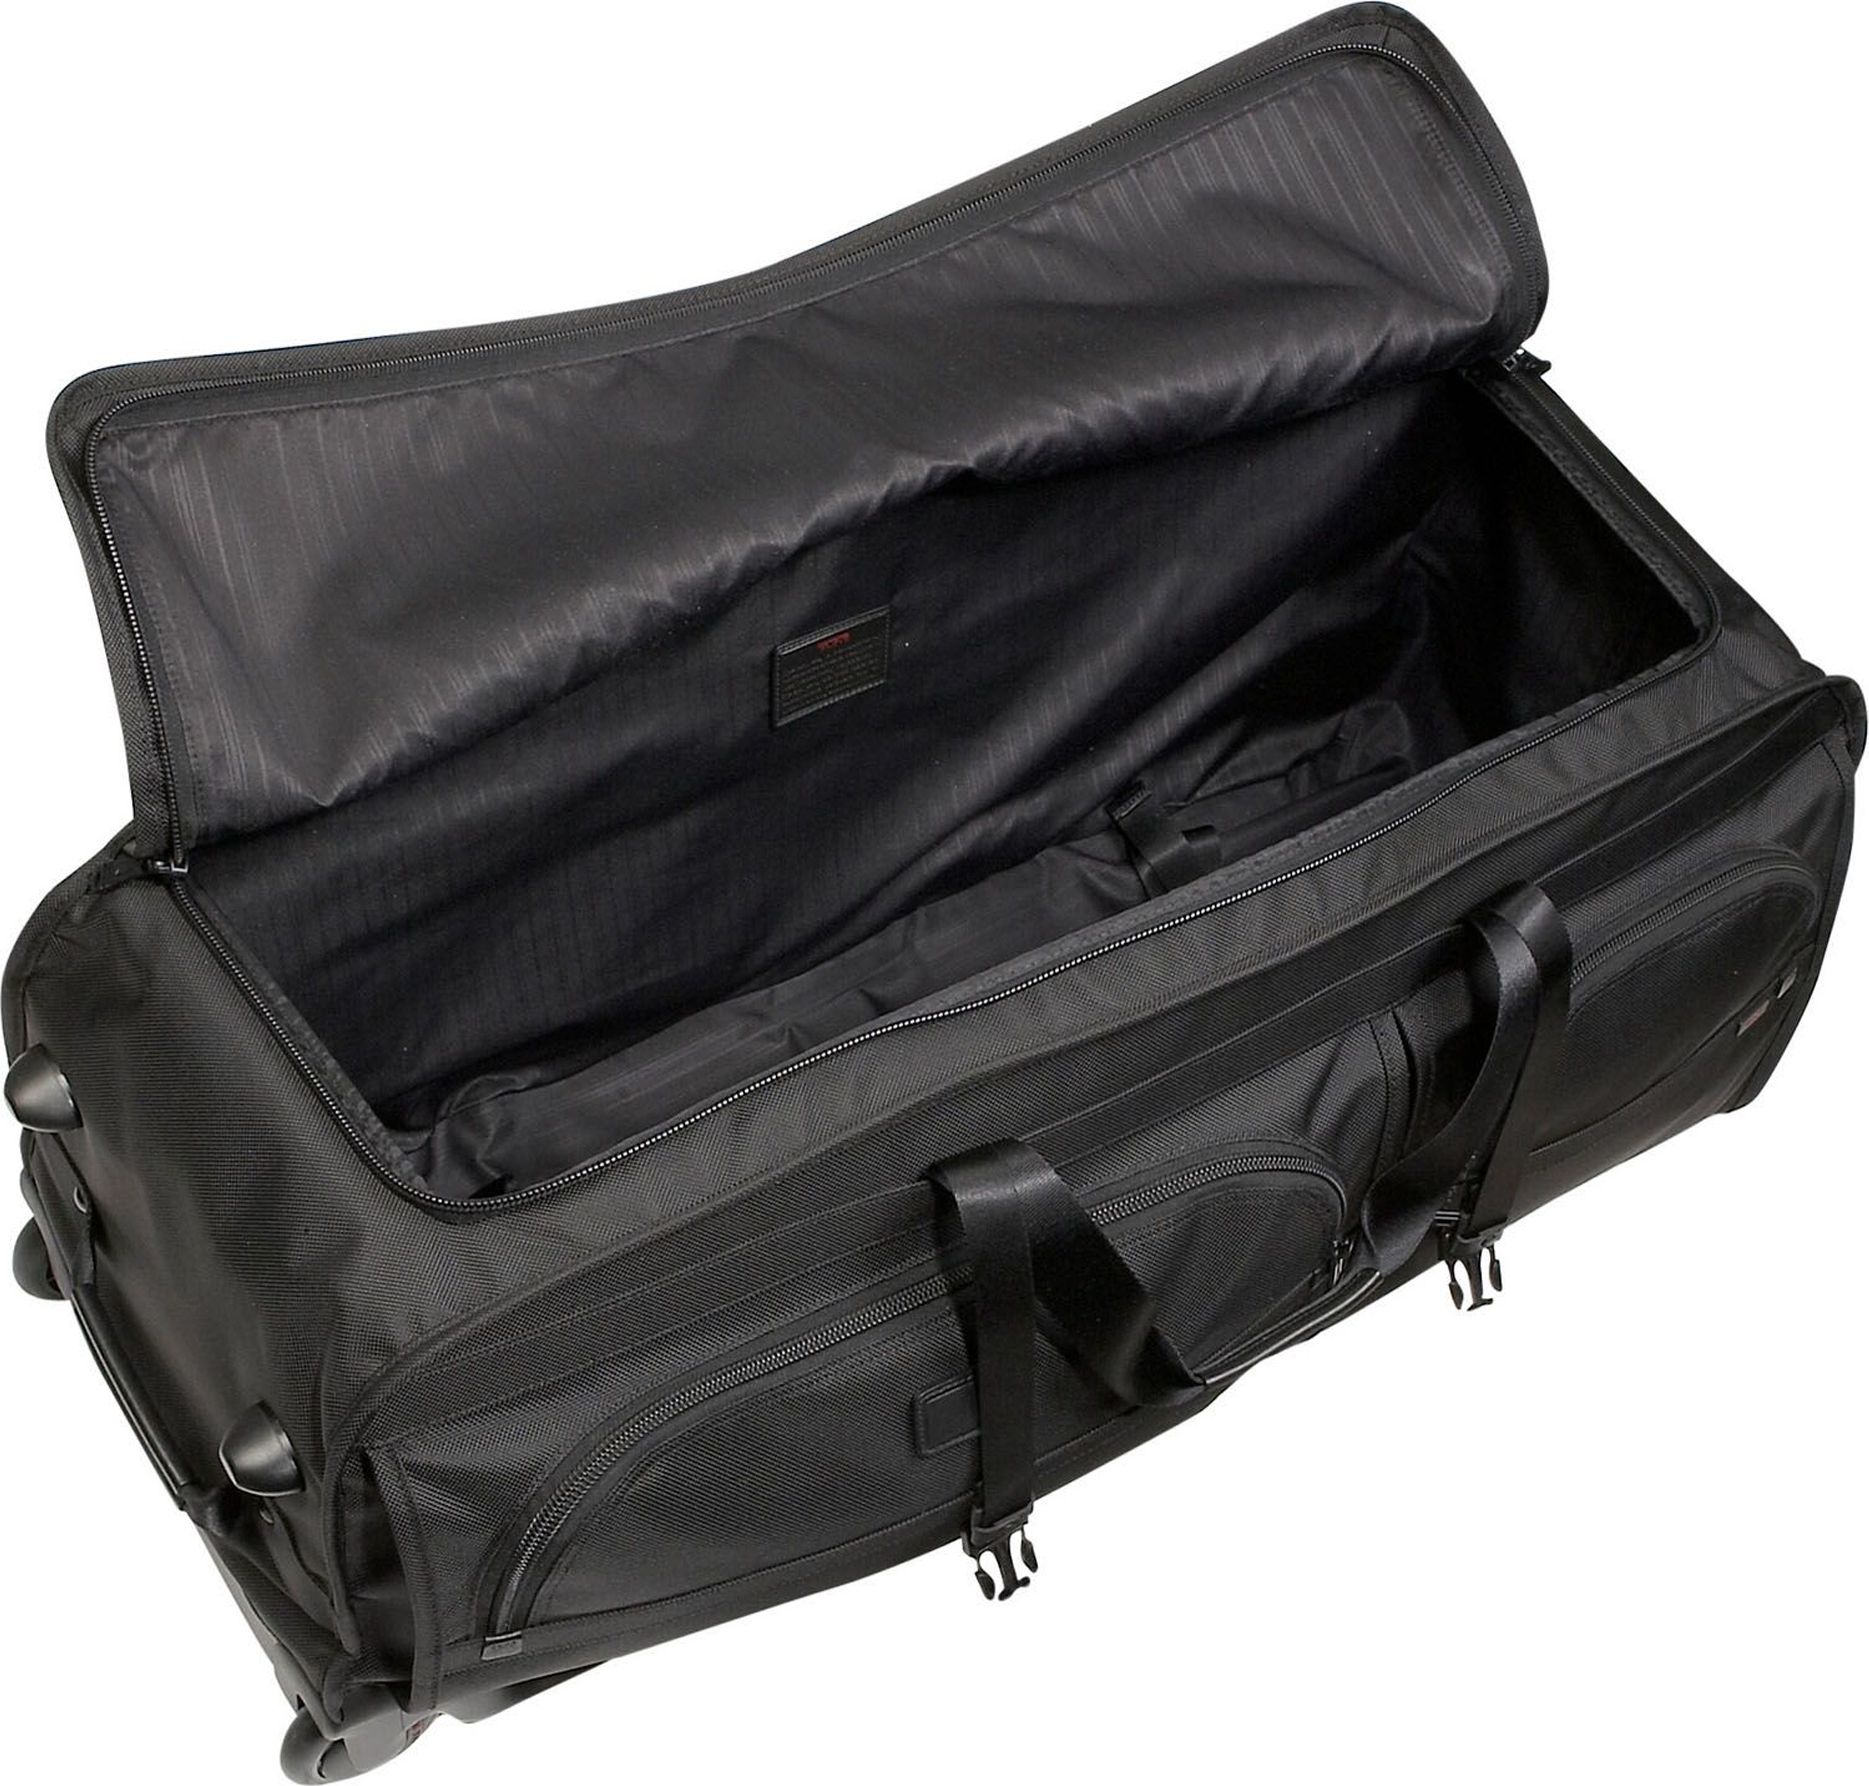 Tumi Alpha Extra Large Wheeled Duffel Bag in Black for Men - Lyst